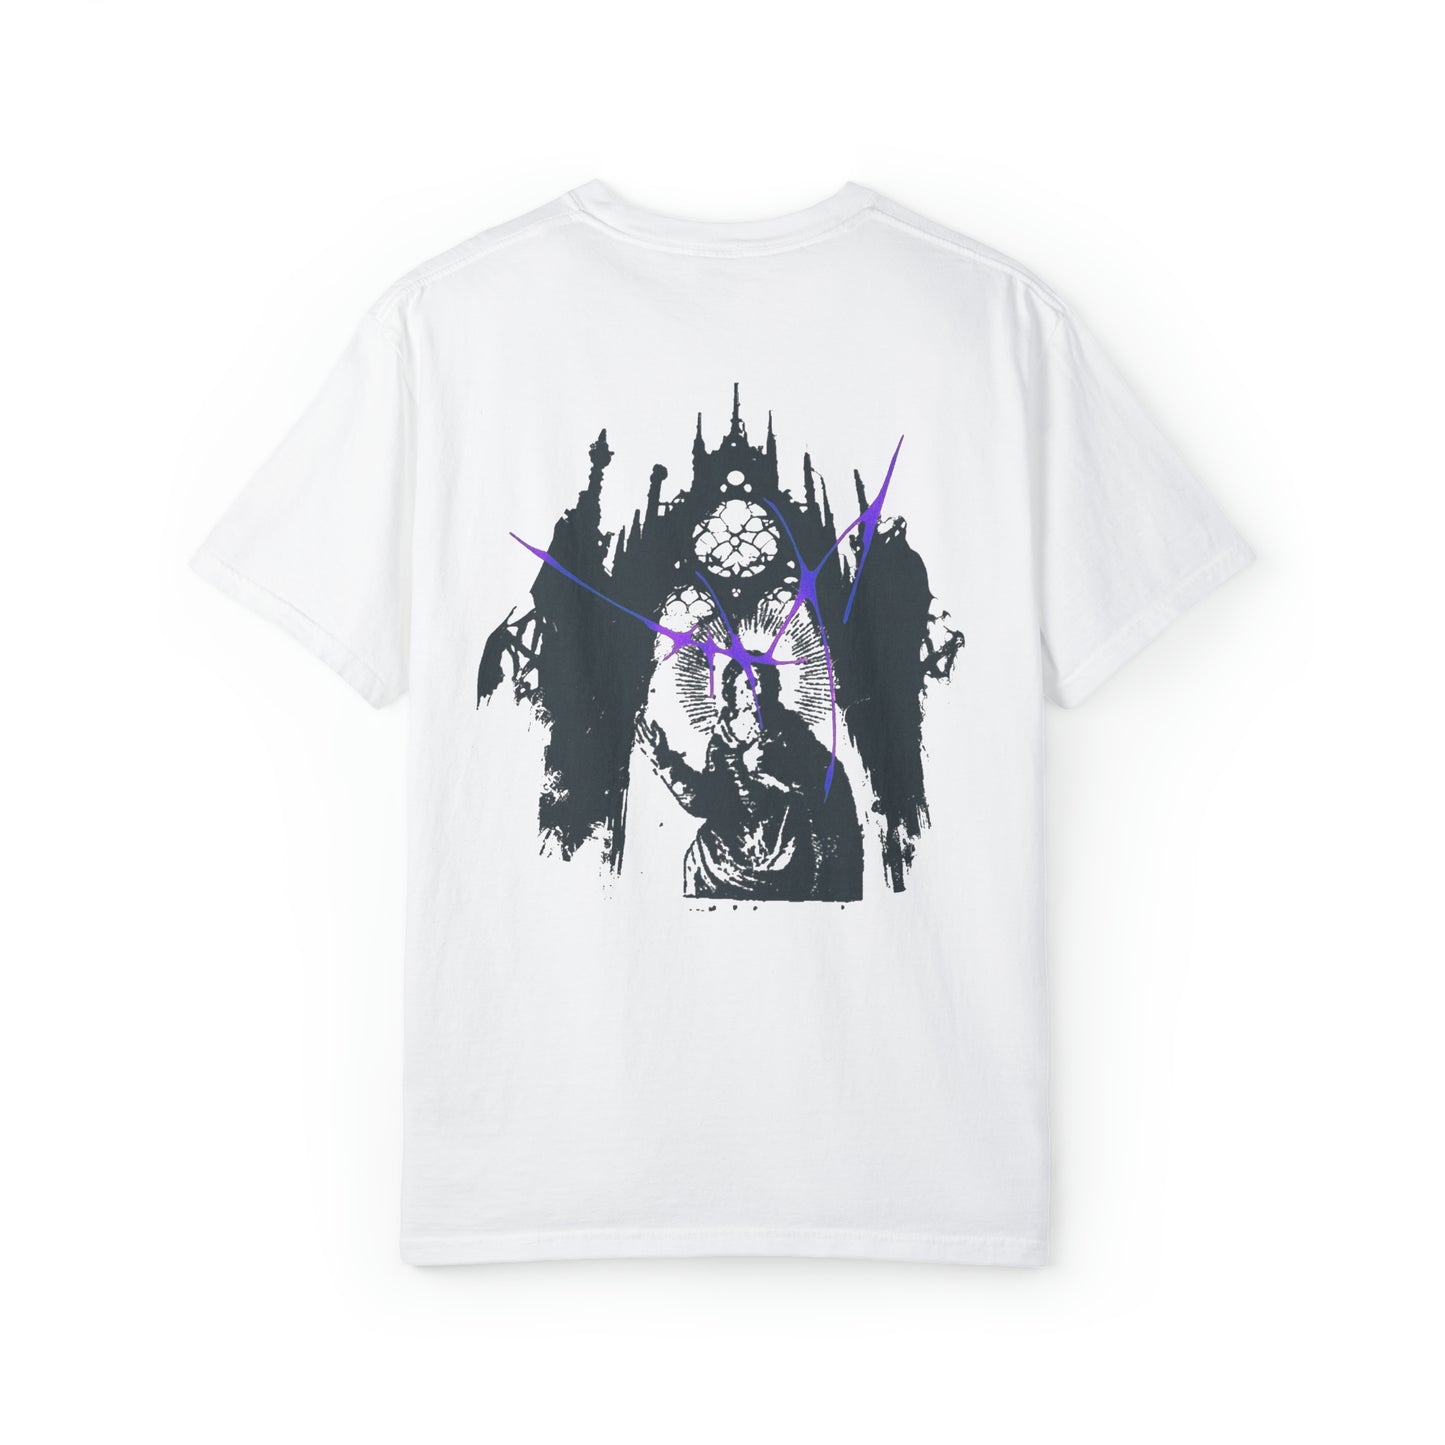 "CATHEDRAL" s/s tee